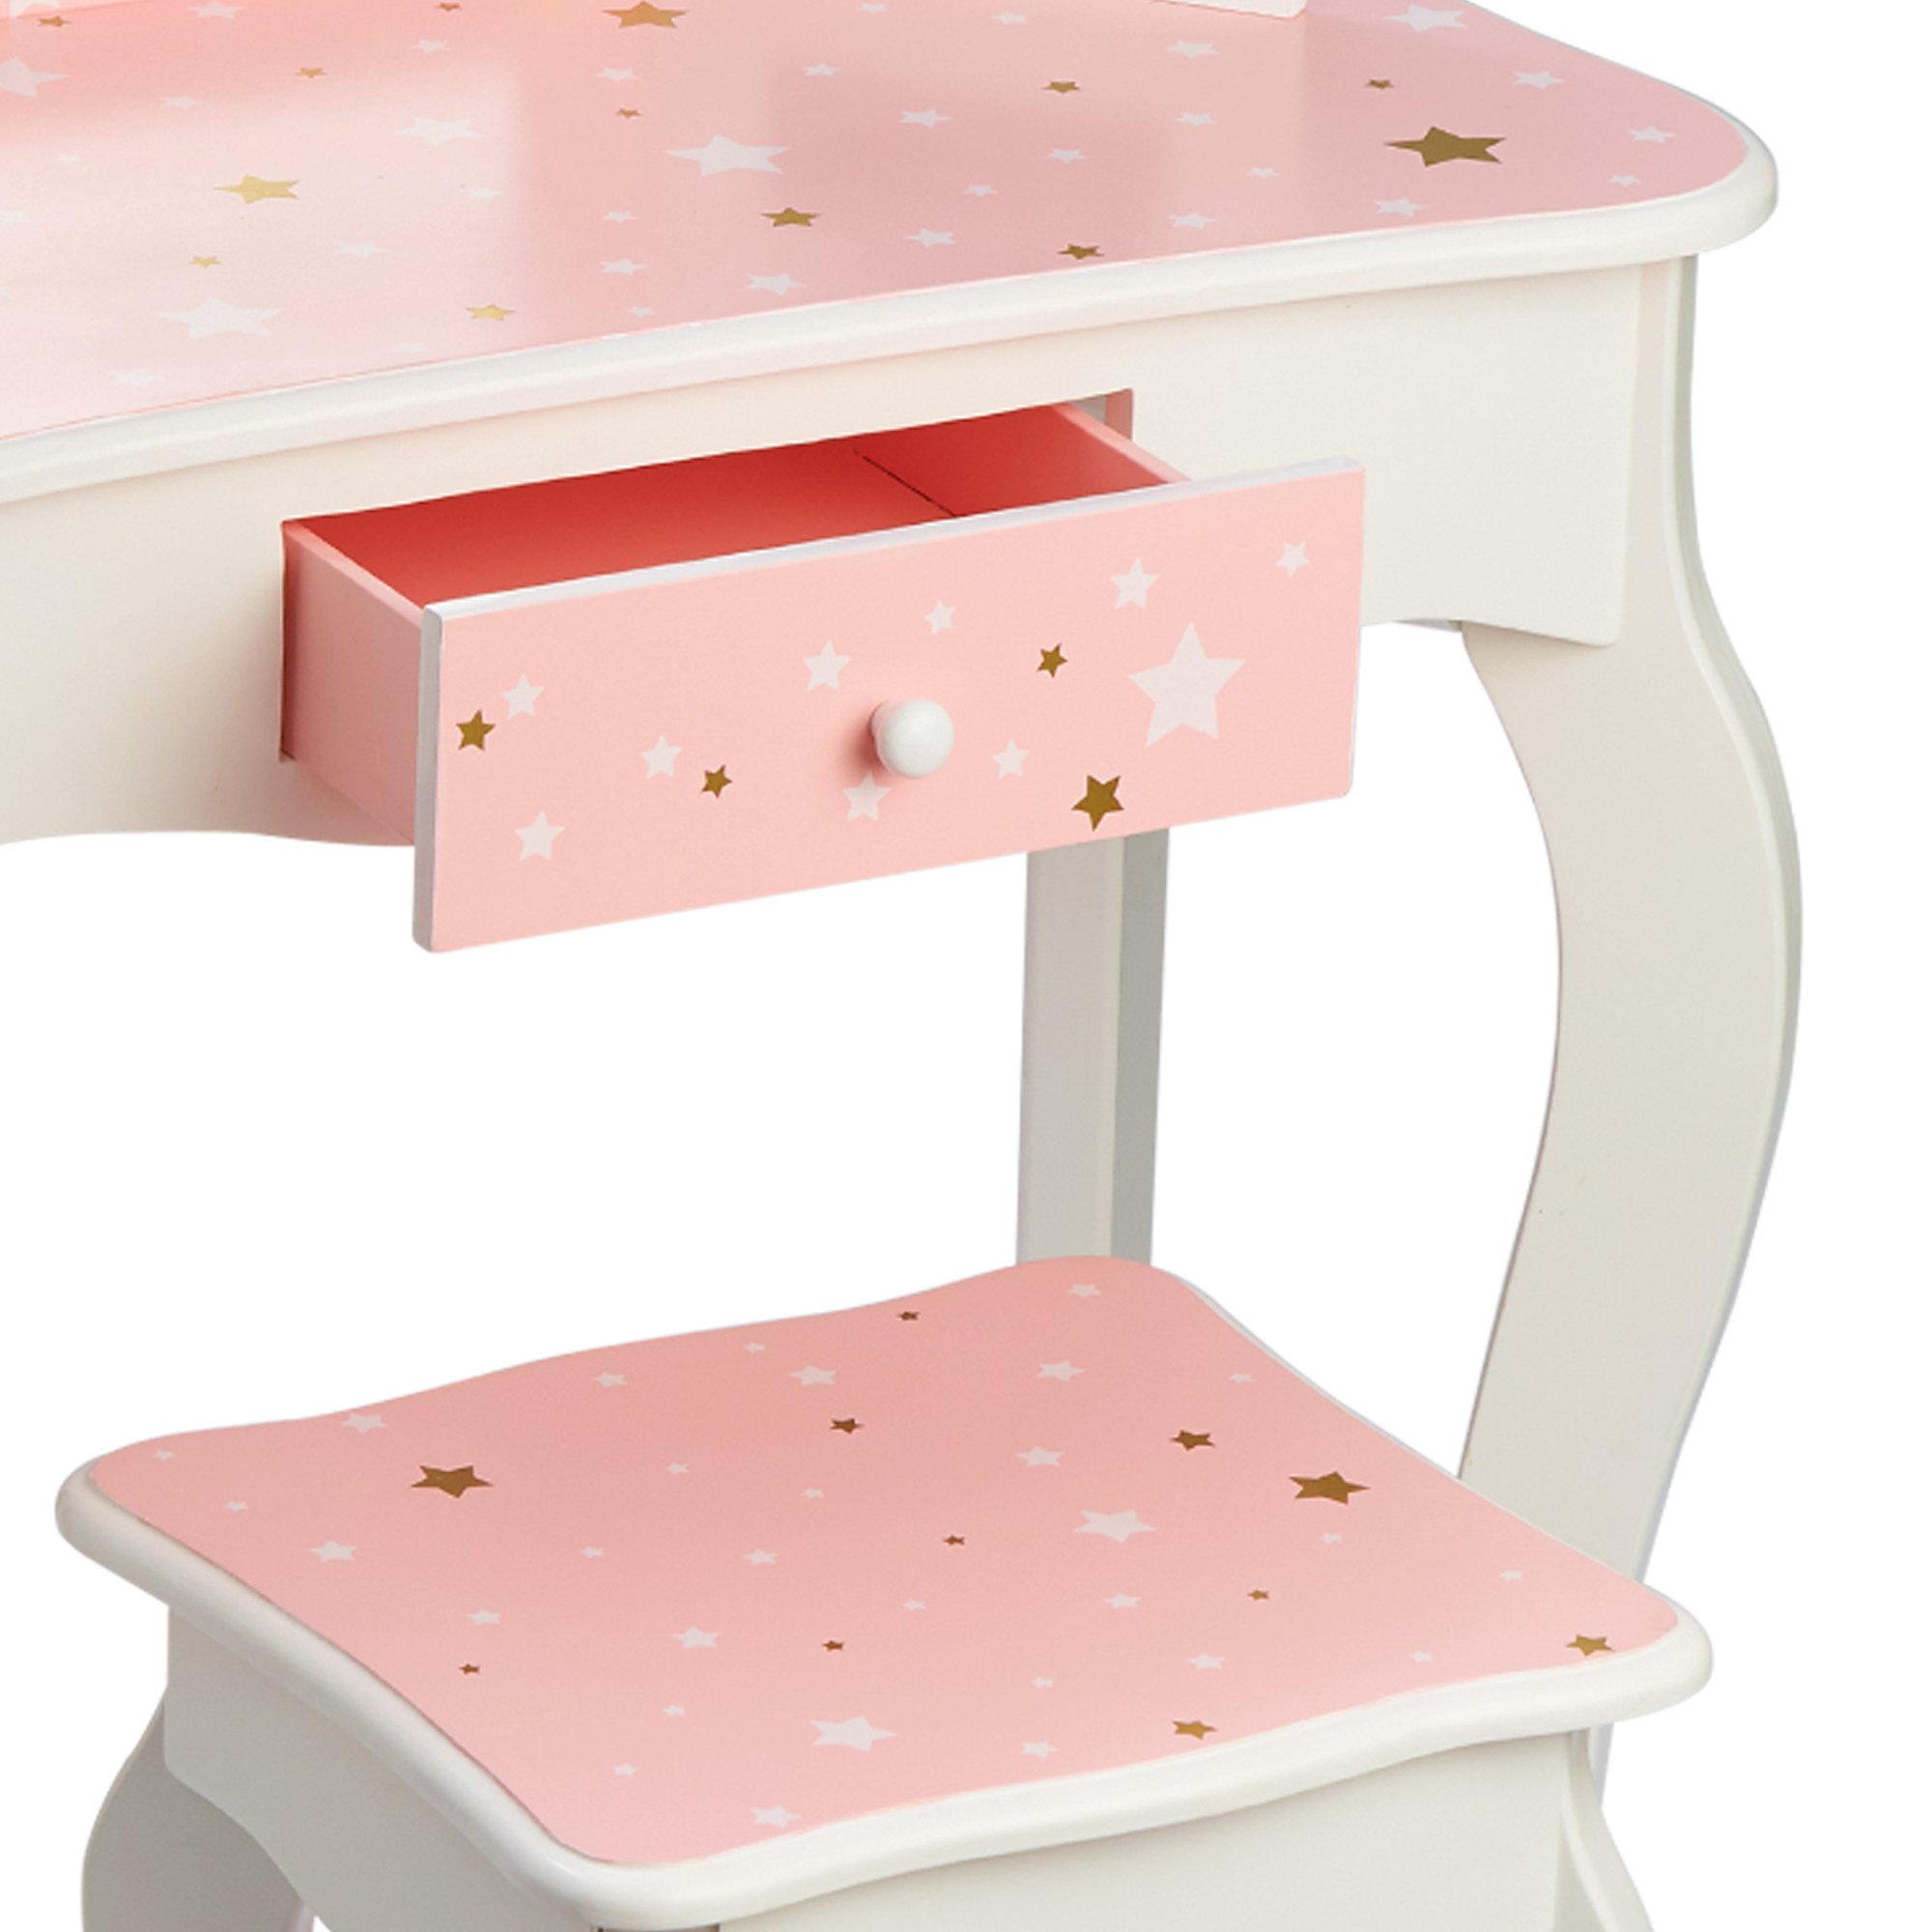 Teamson Kids Pretend Play Kids Vanity, Table & Chair Vanity Set with Mirror, Girls Makeup Dressing Table with Storage Drawer & Twinkle Stars Print, Gisele Collection, Pink/White